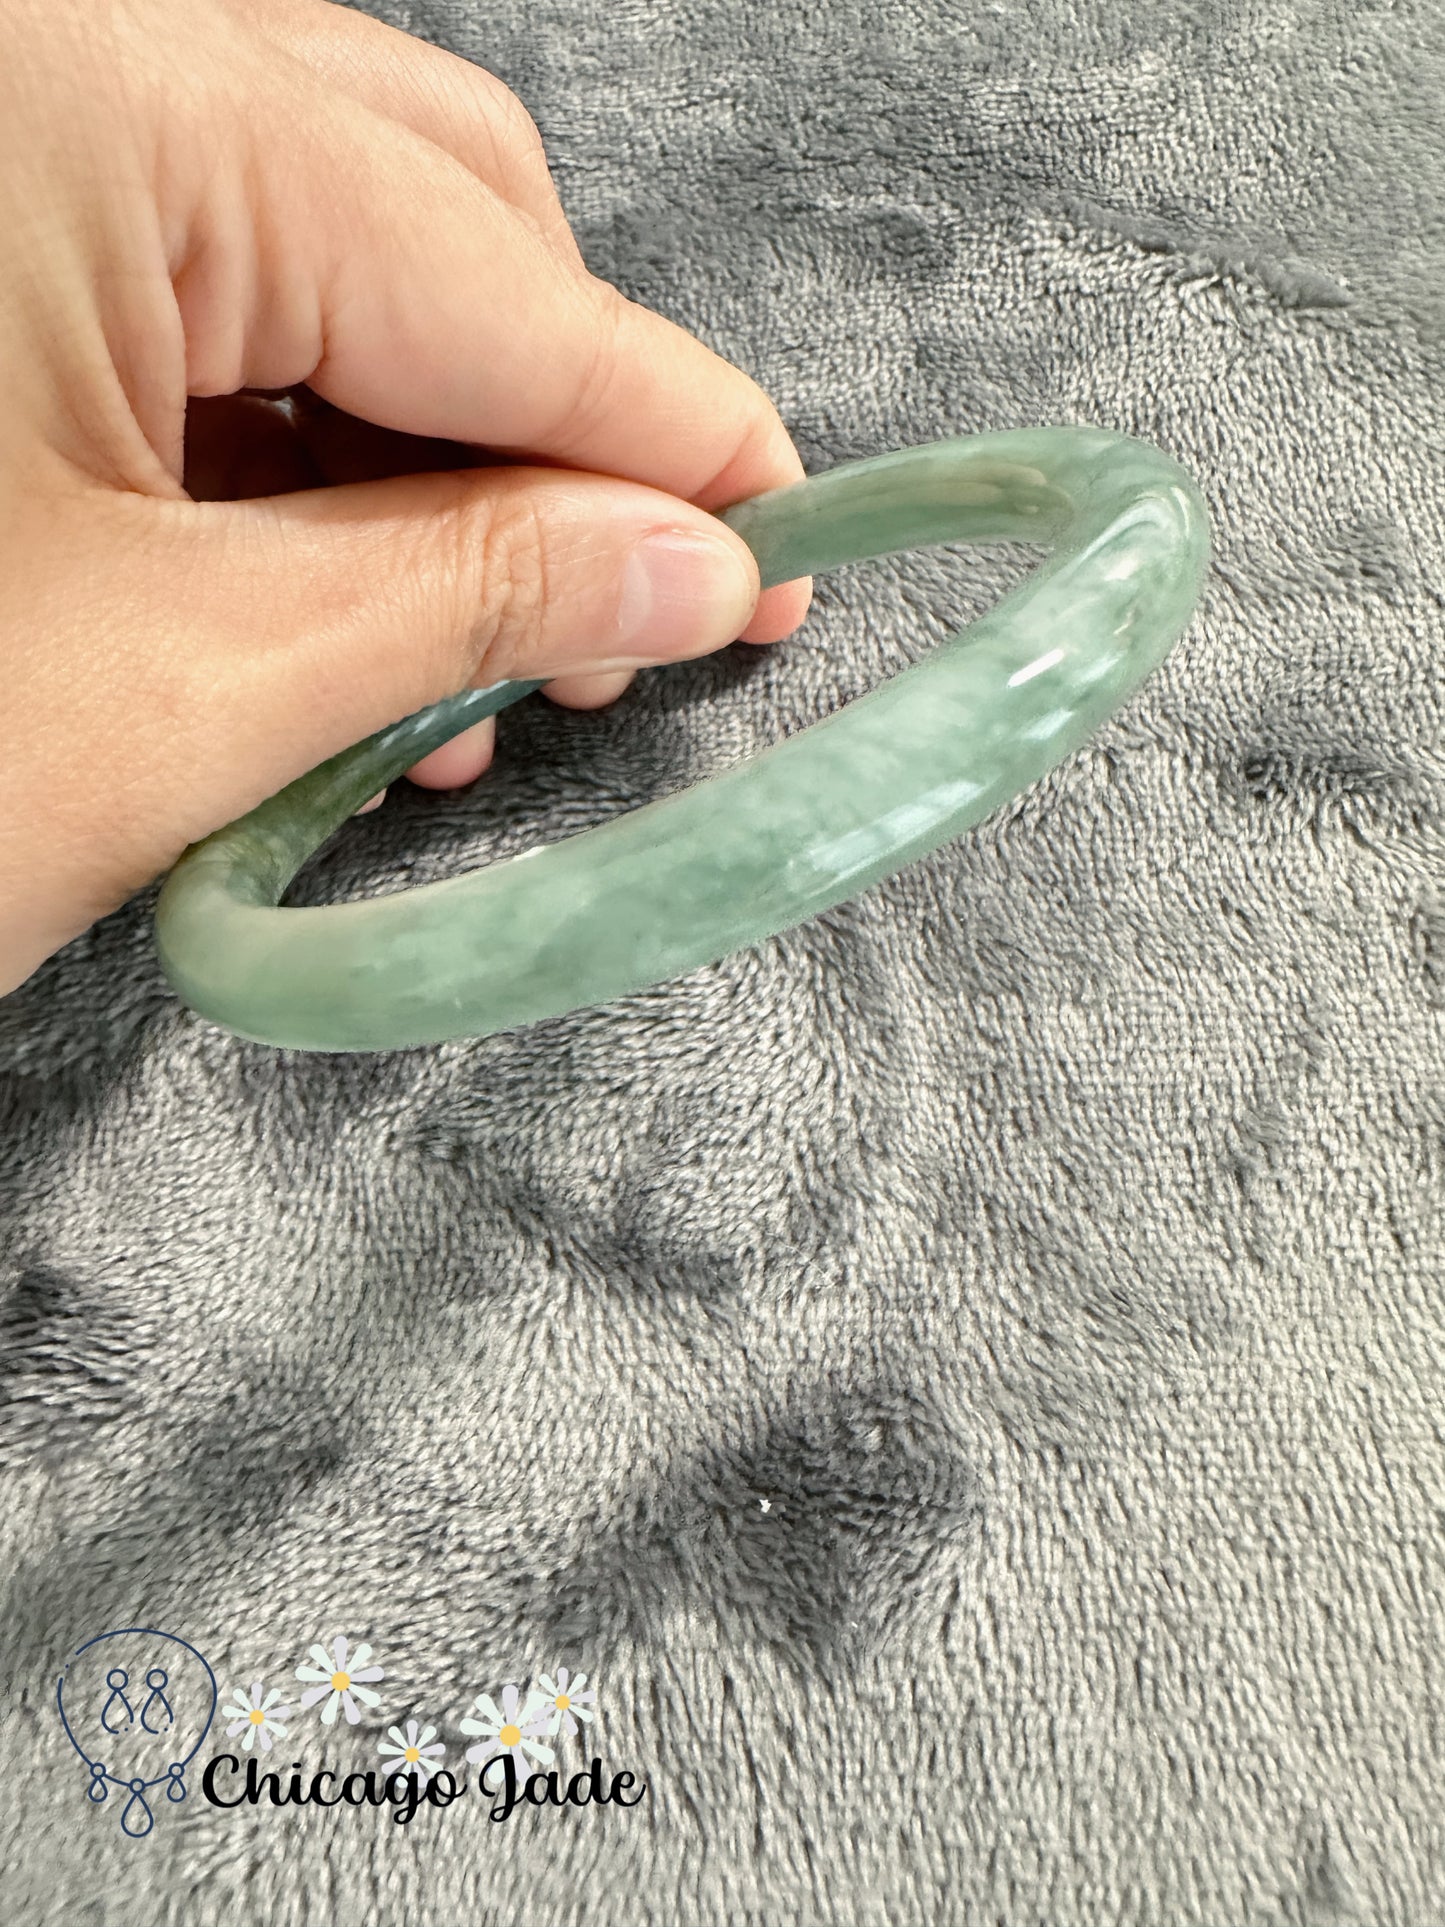 Full green with touch of yellow jadeite jade round bangle size L 57.7mm authentic untreated